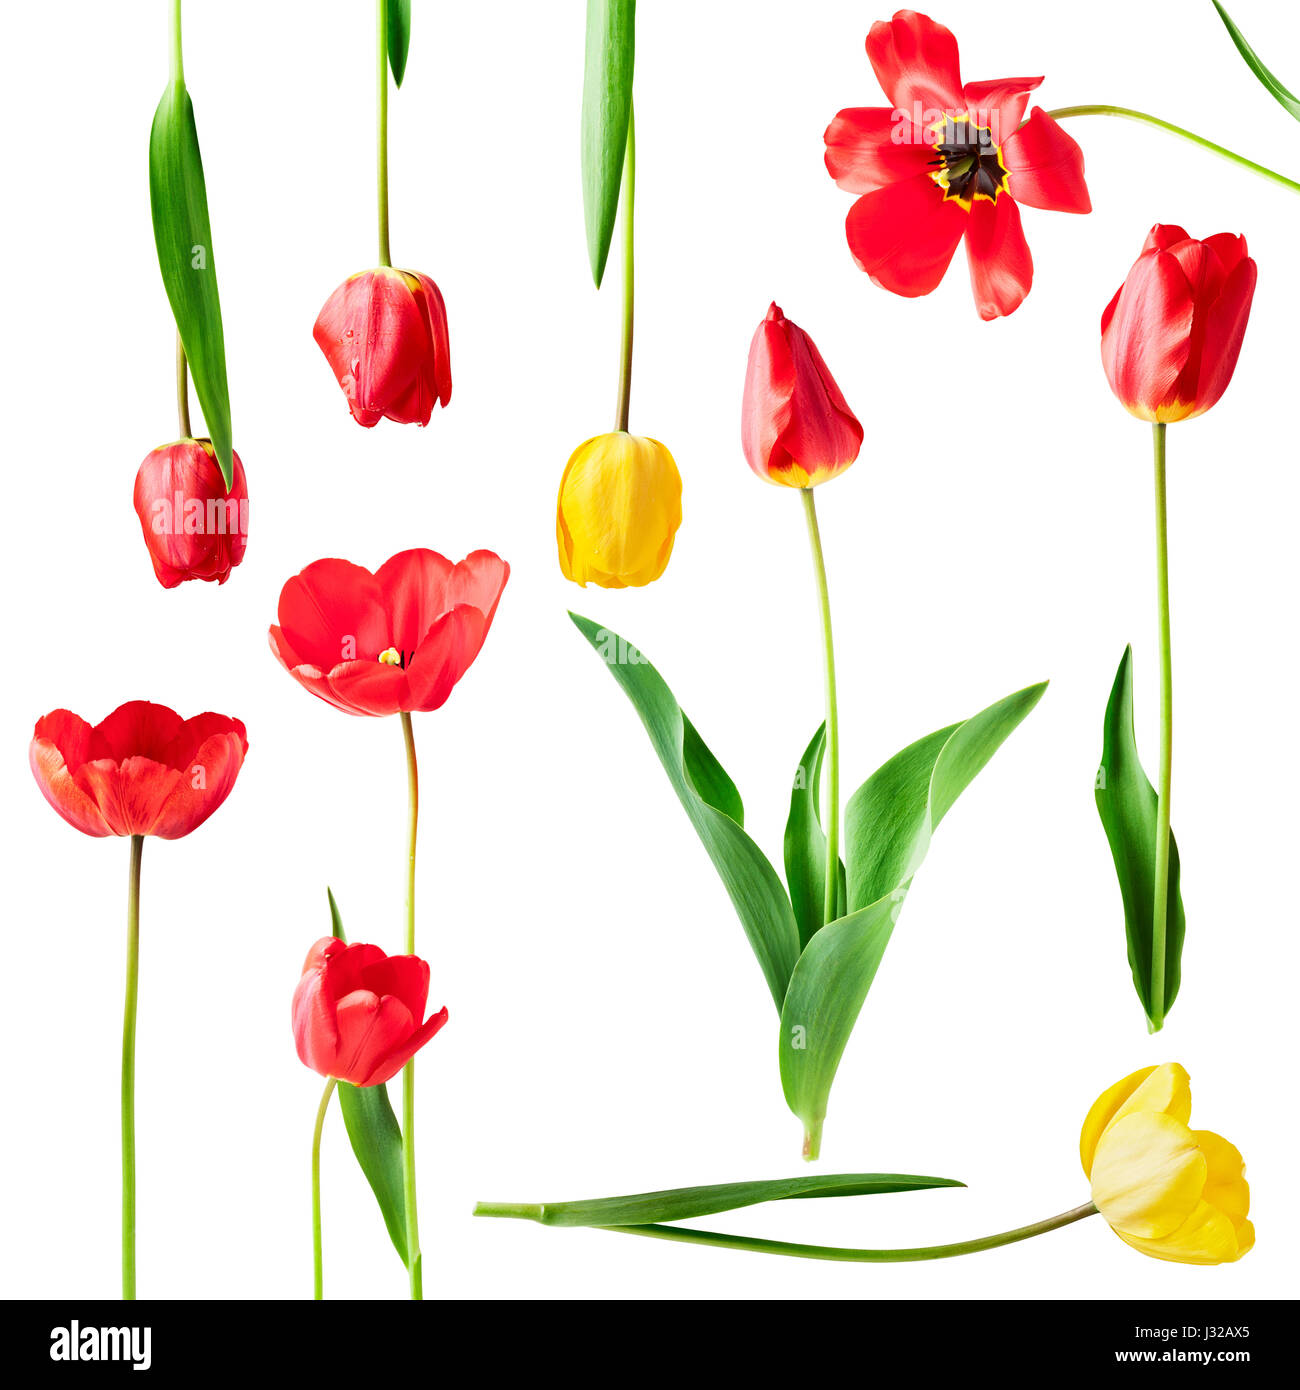 Red and yellow tulip flower with leaves collection isolated on white. Abstract background with spring garden flowers Stock Photo